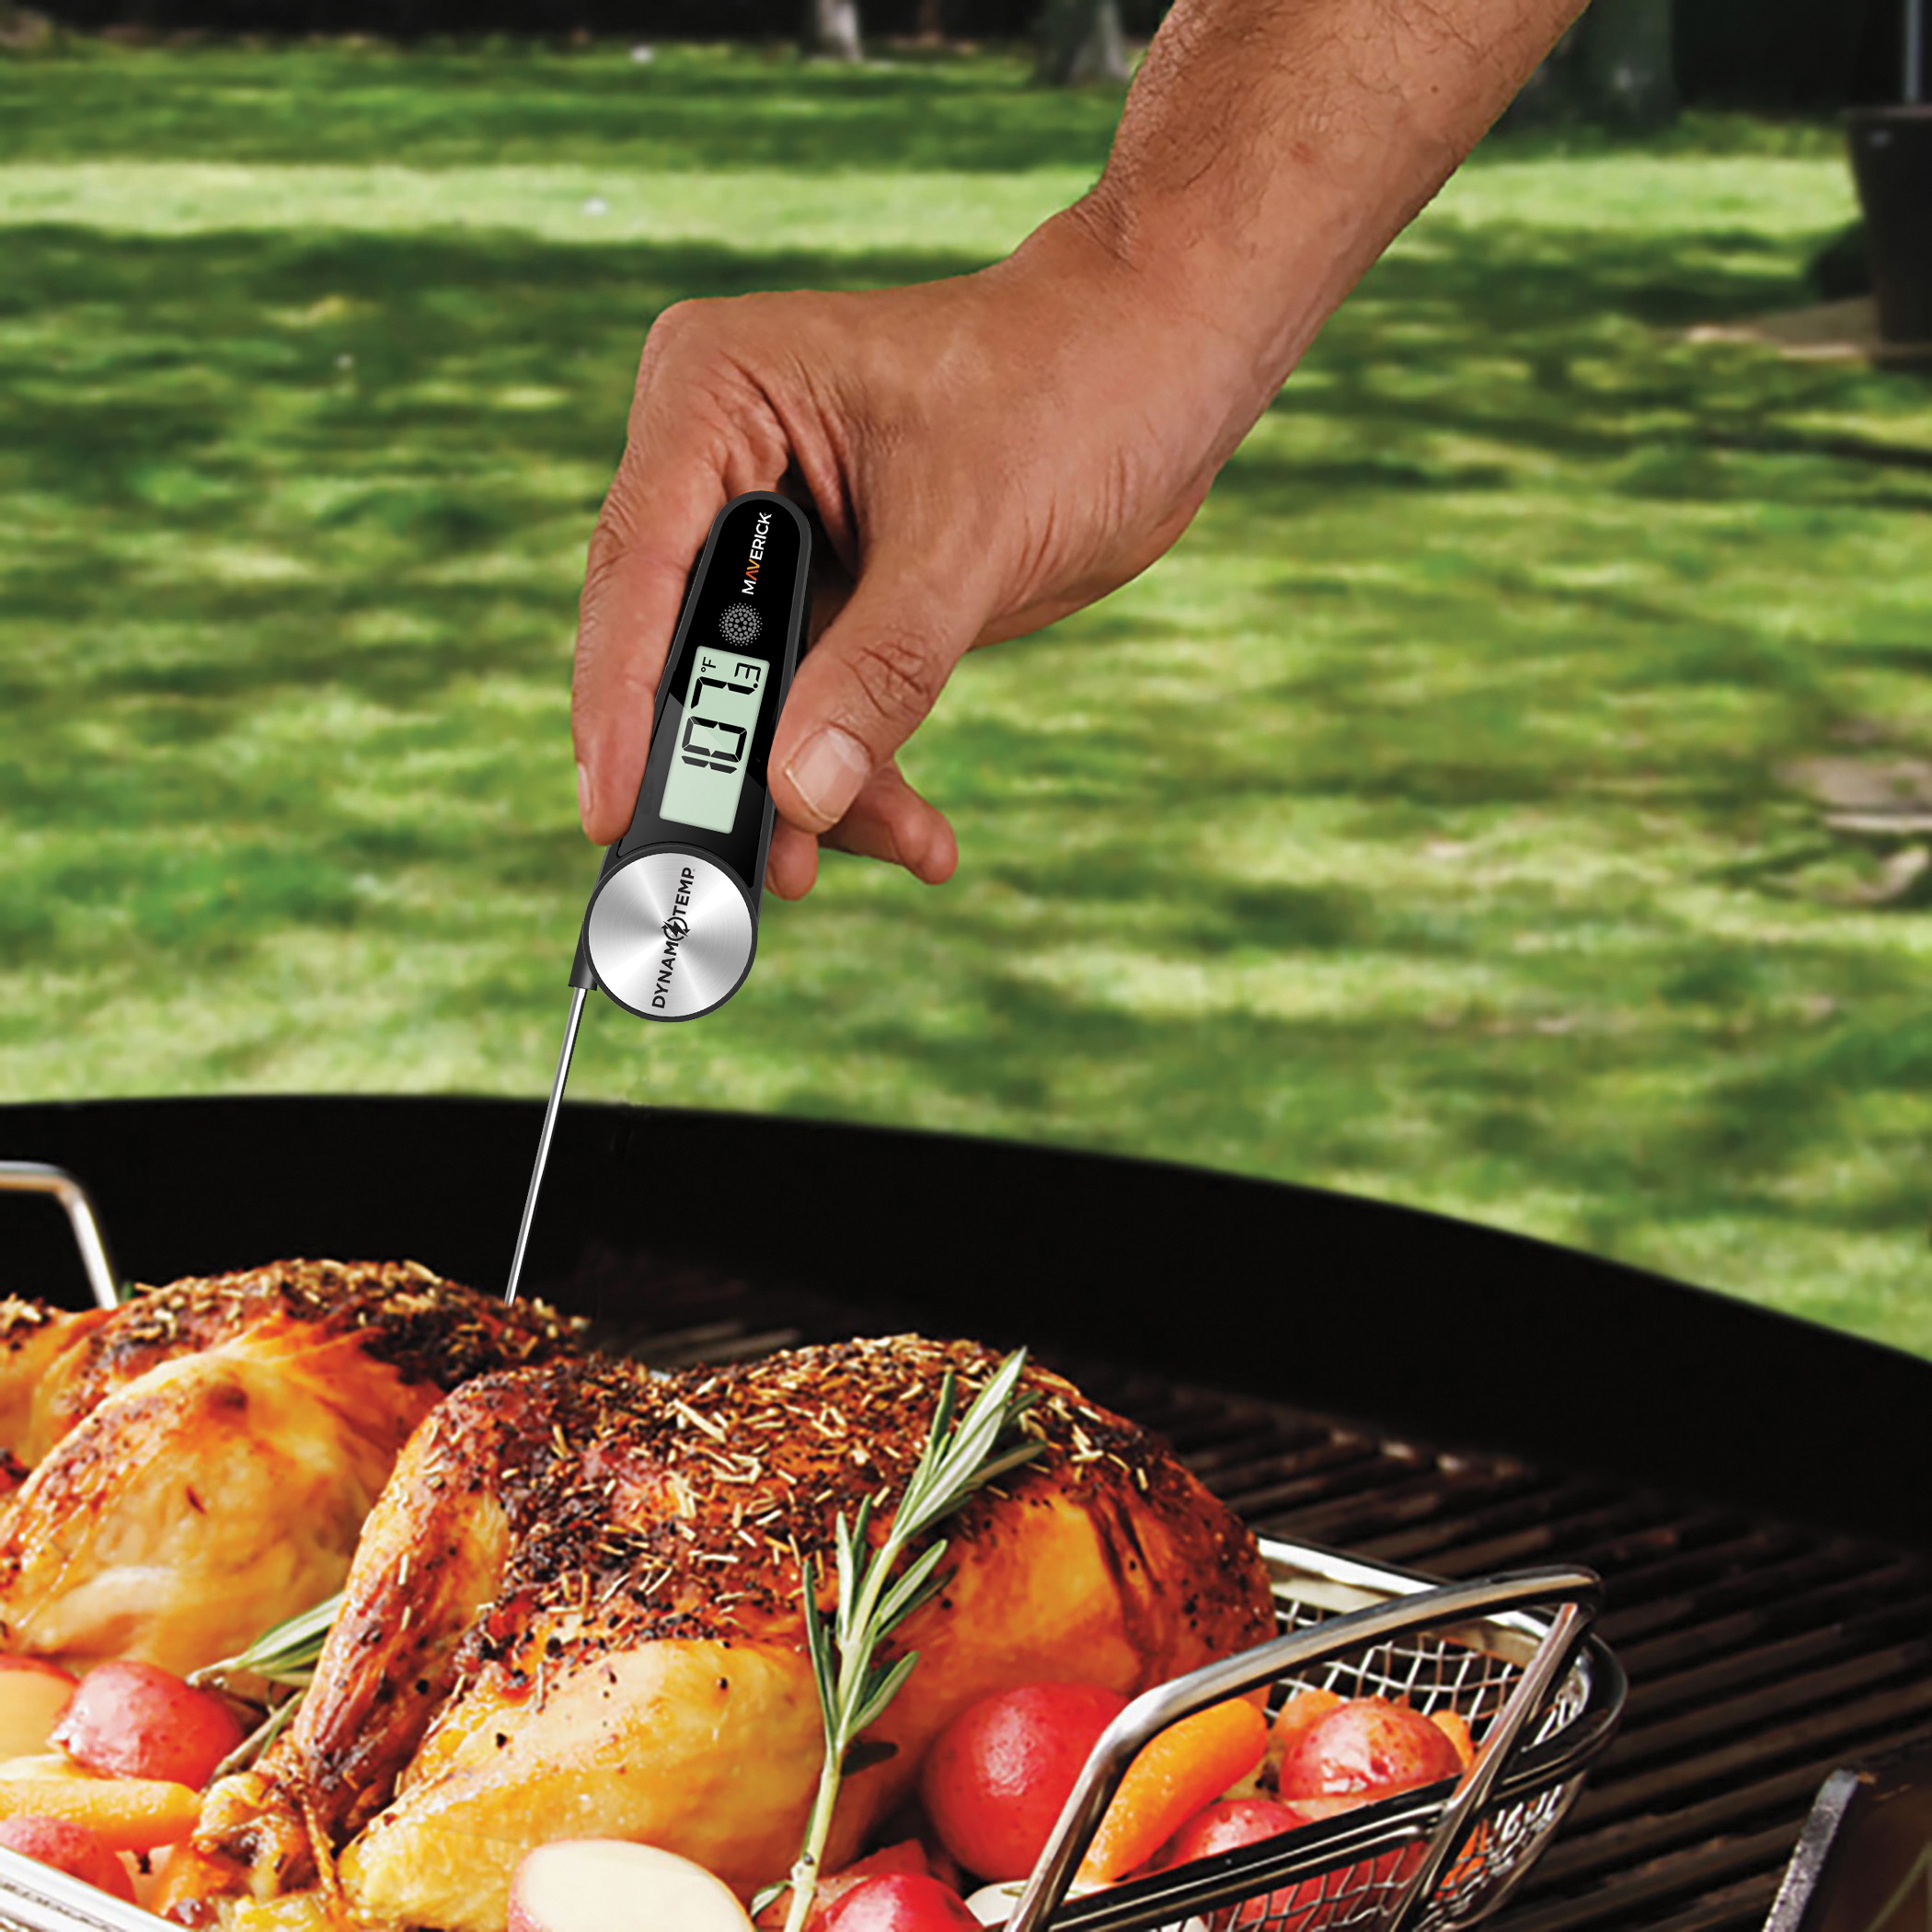 DYNT-01 DYNAMO TEMP INSTANT READ FOOD THERMOMETER